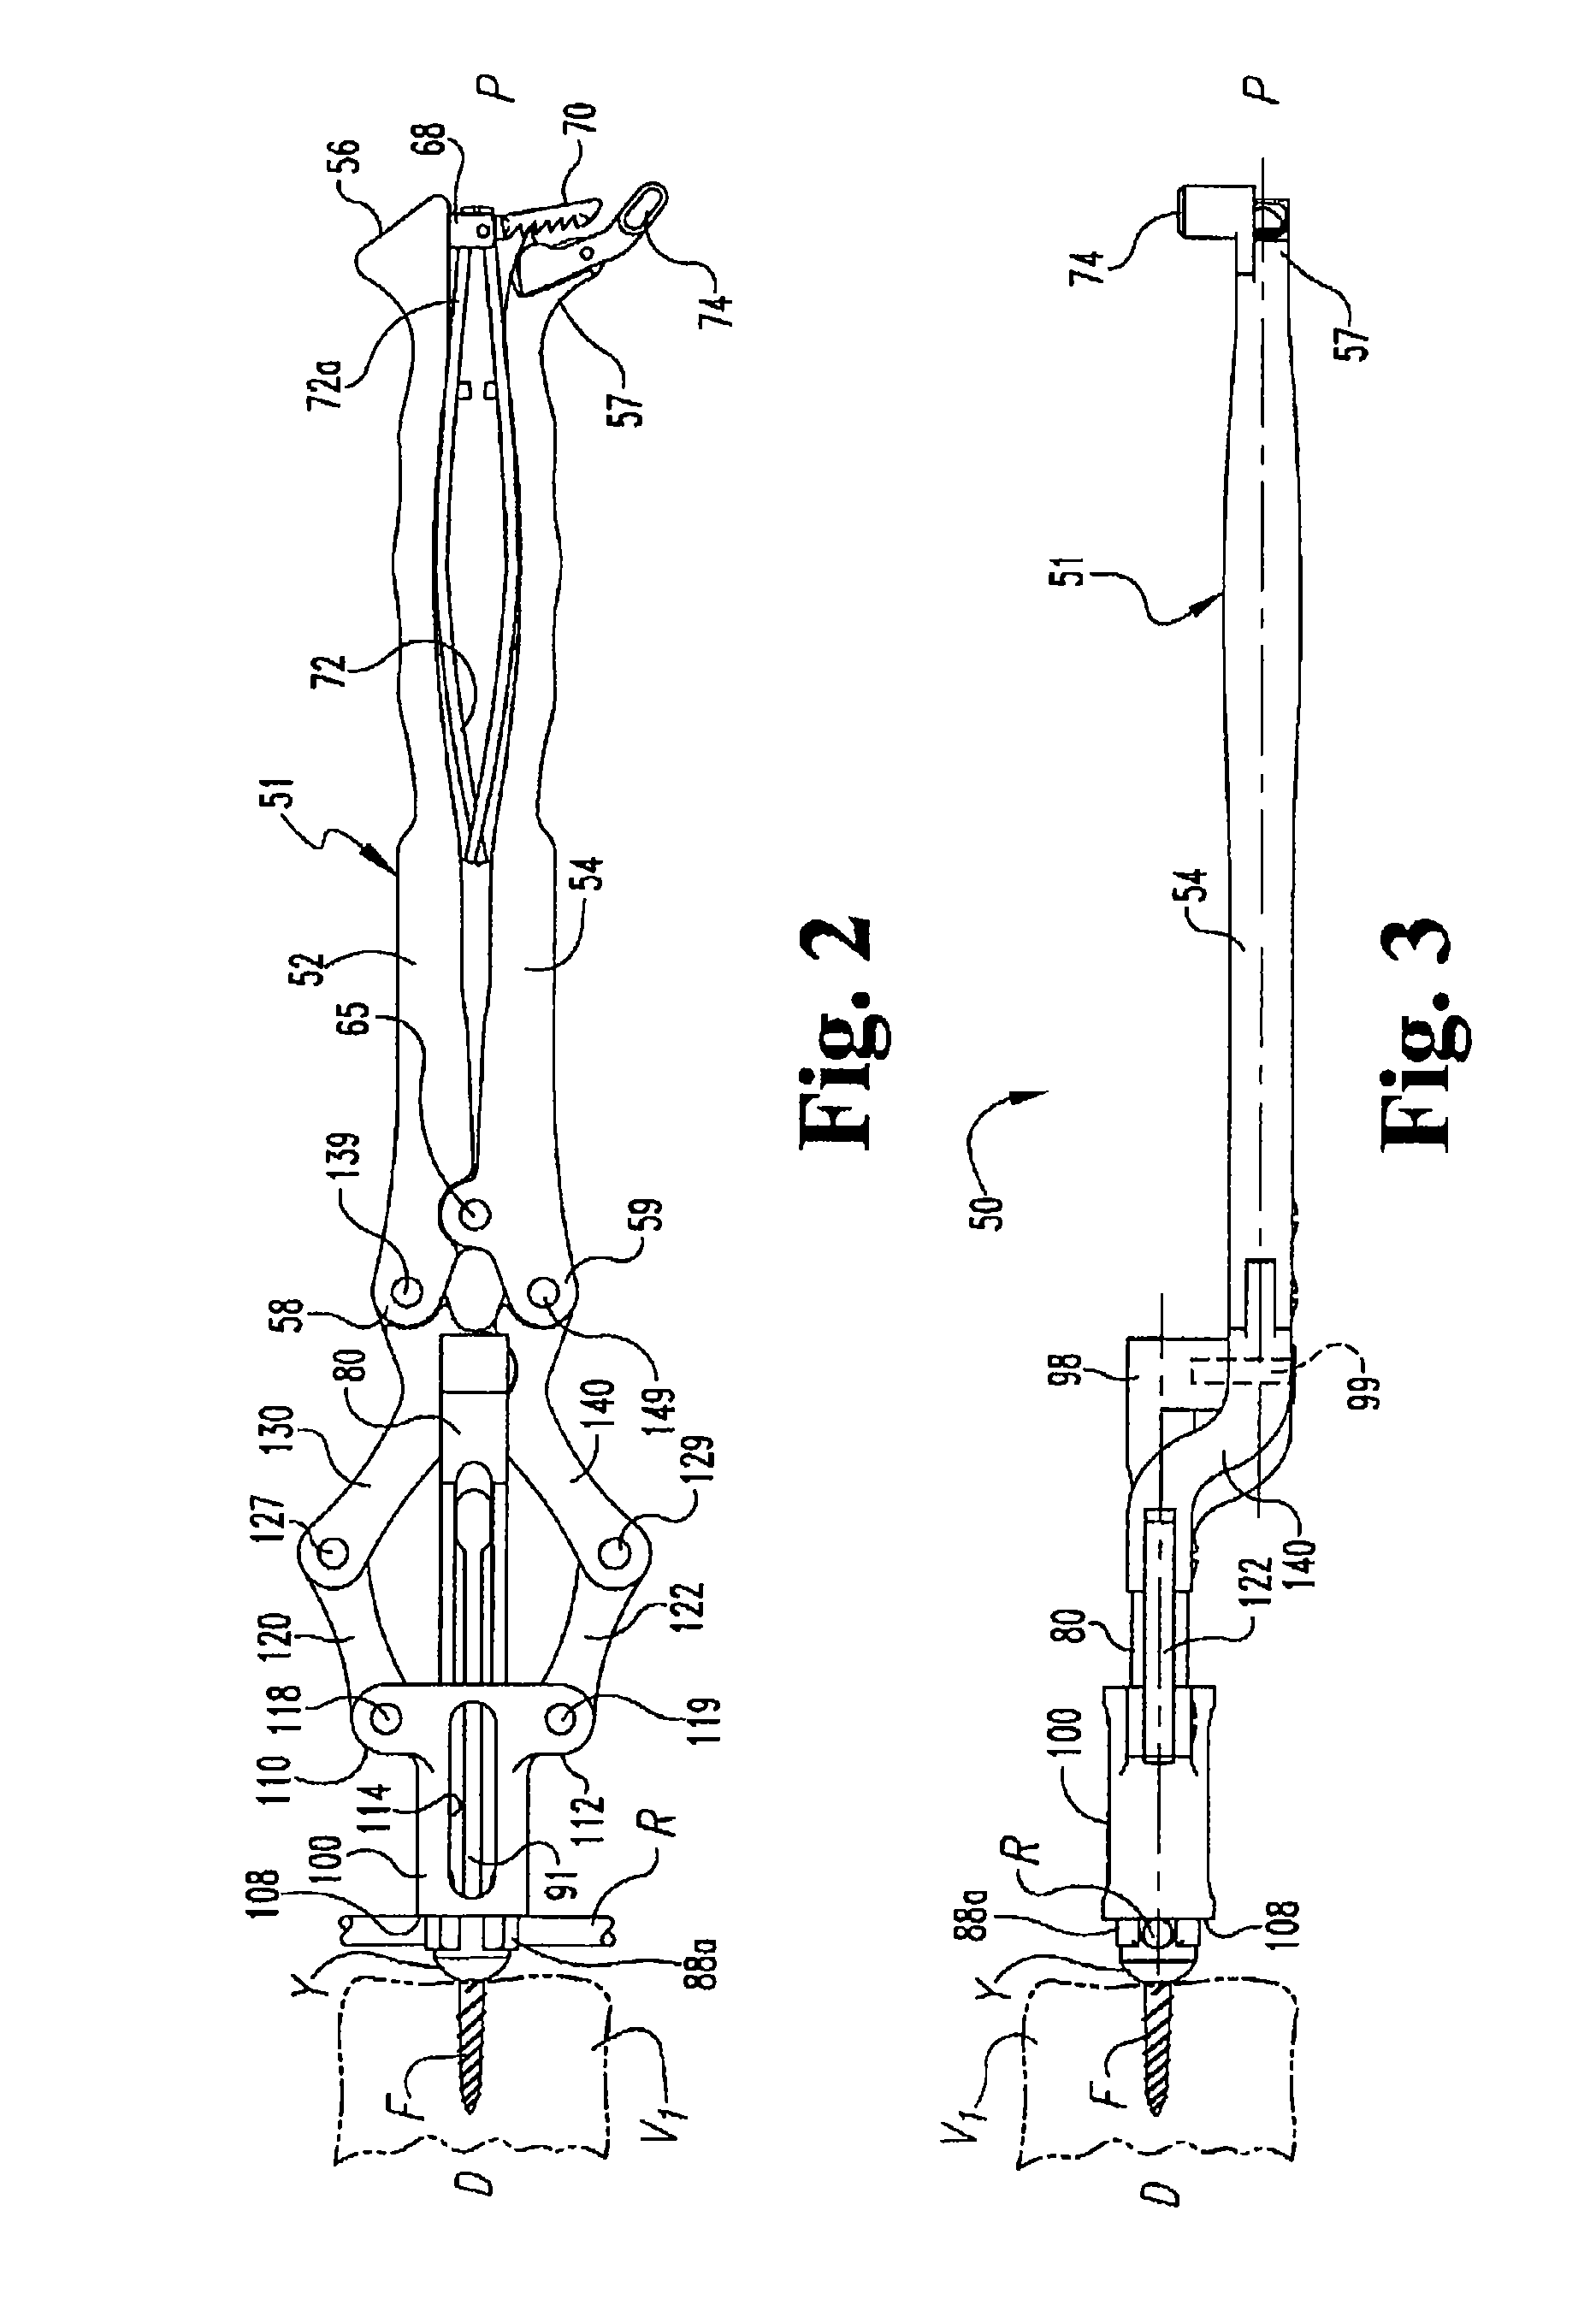 Rod reducer instruments and methods